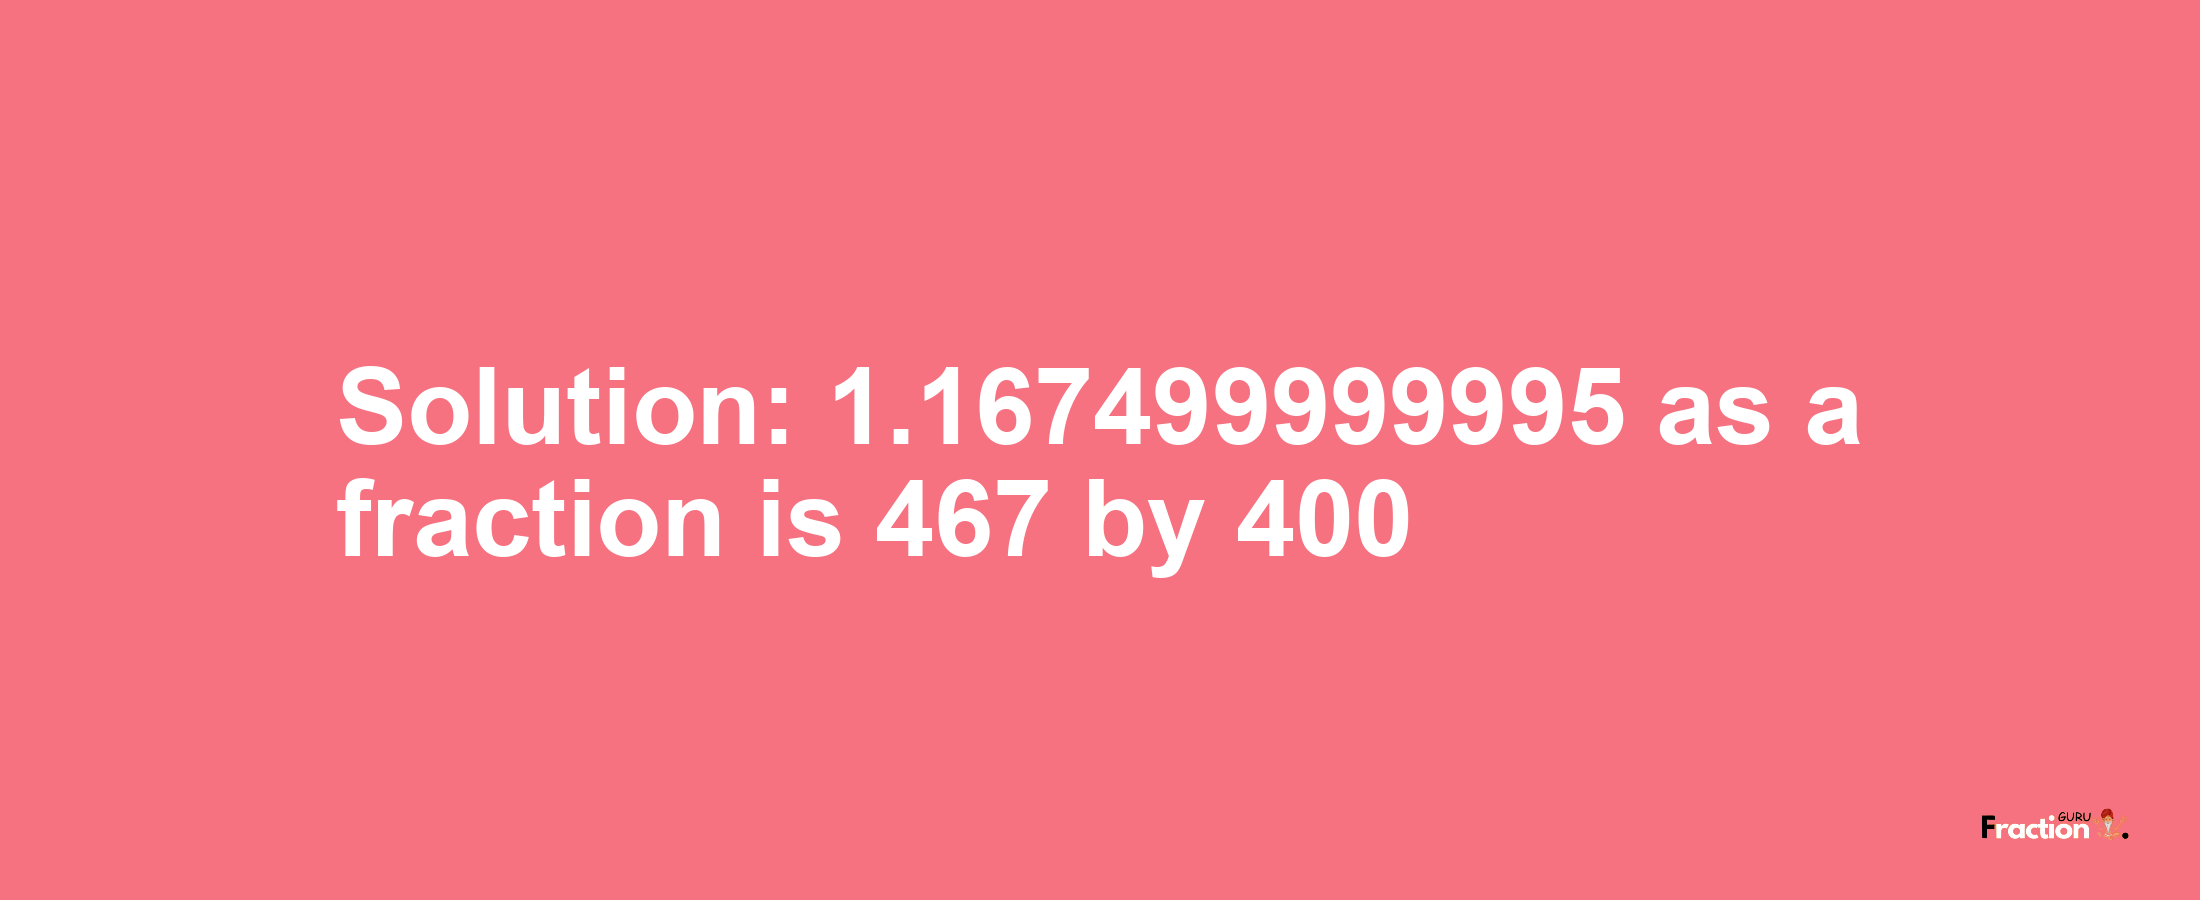 Solution:1.167499999995 as a fraction is 467/400